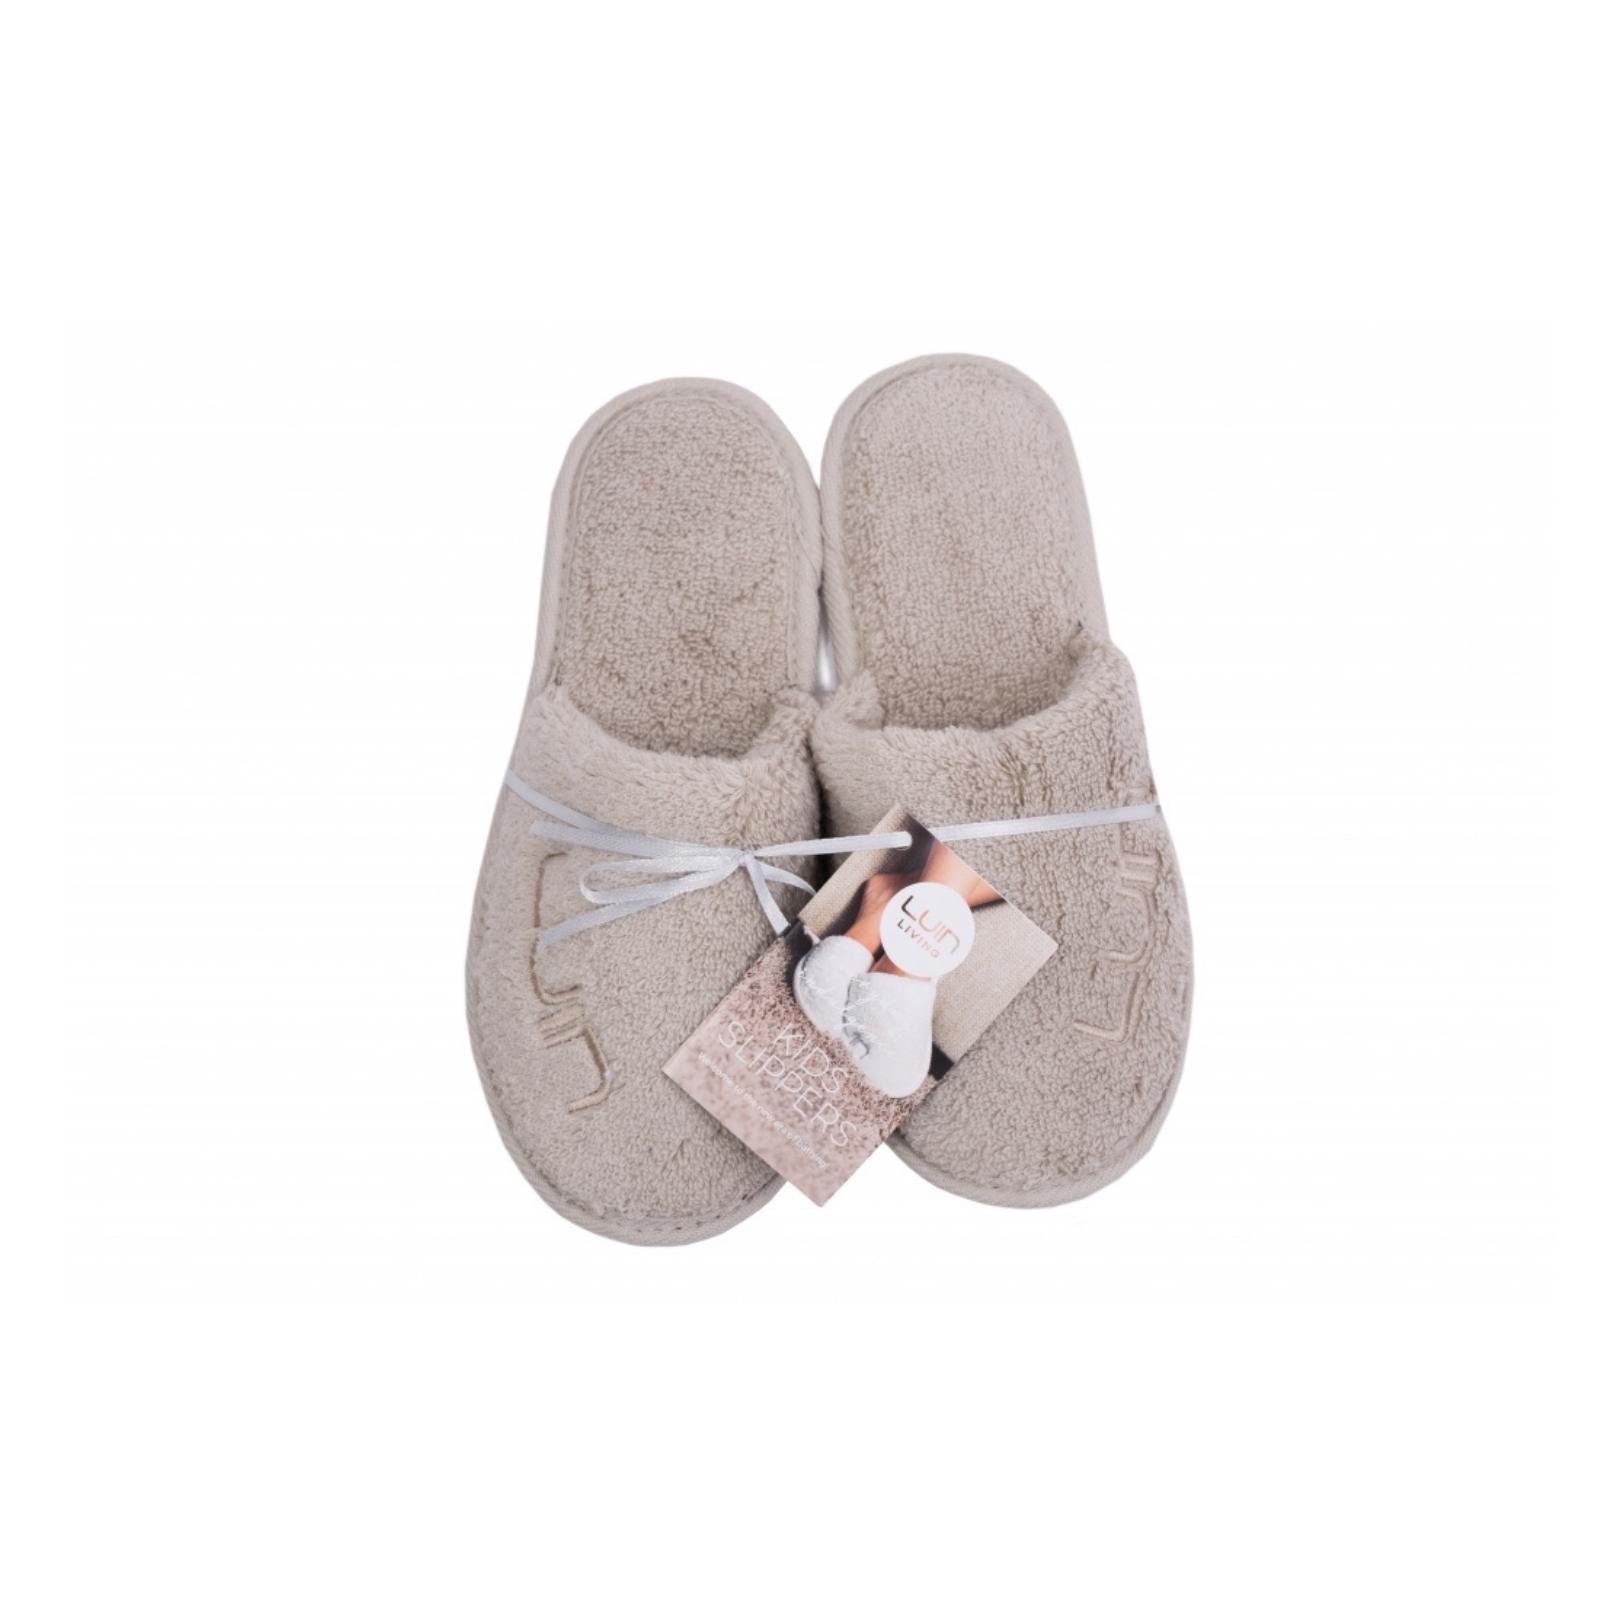 Kids slippers 32-34 sand Luin Living Your Home Your Spa